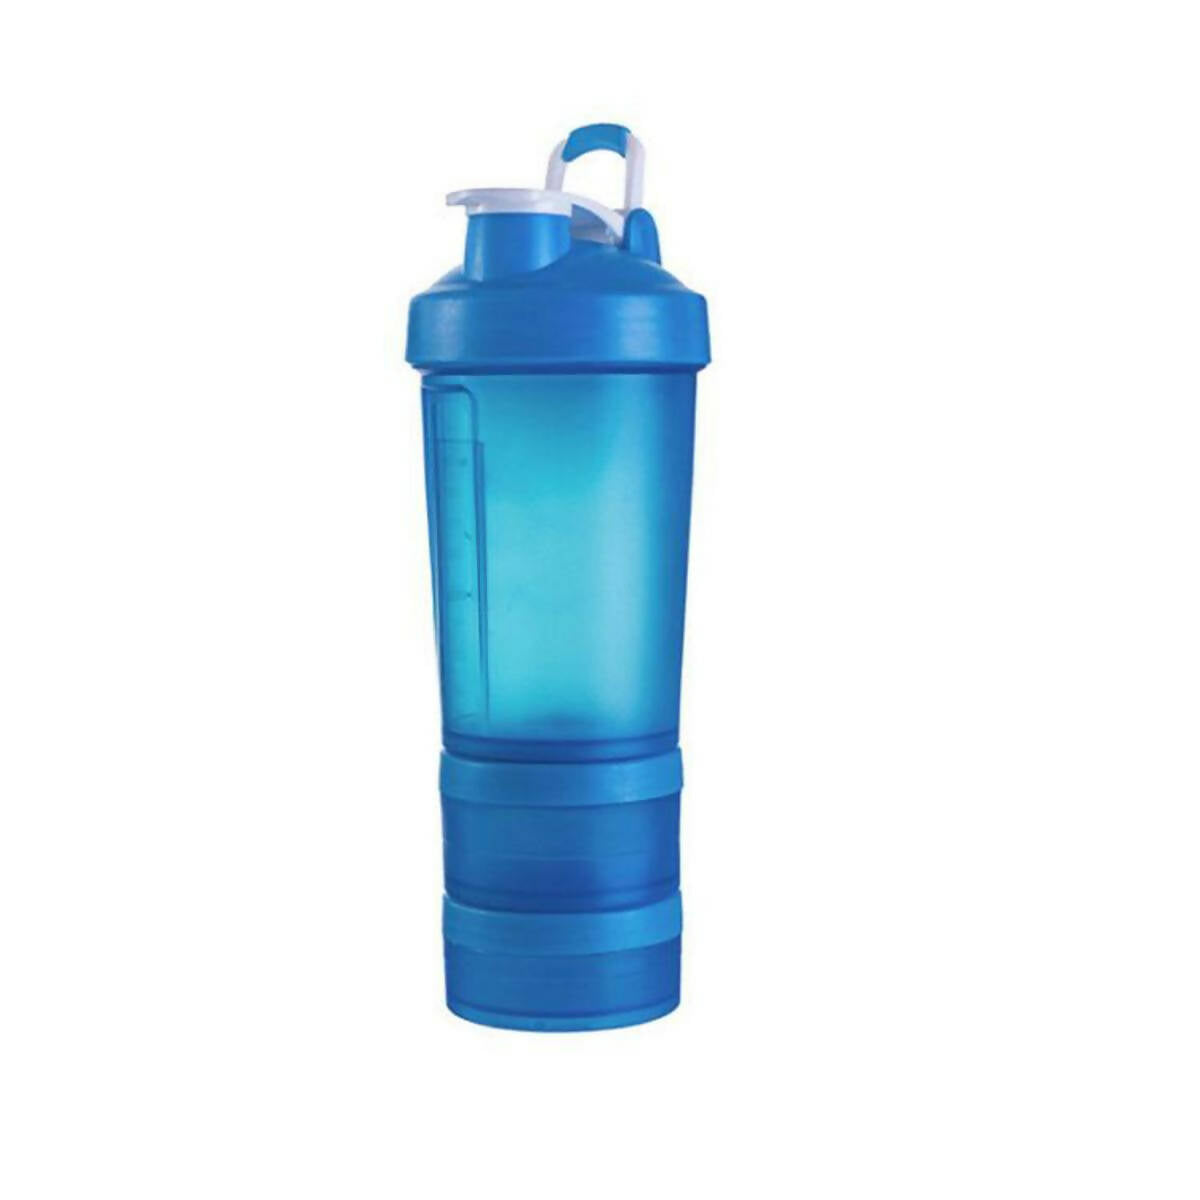 3 in 1 Sports Shaker Bottle For Gym - Storage & Pill Compartments - 450ml - Light Blue